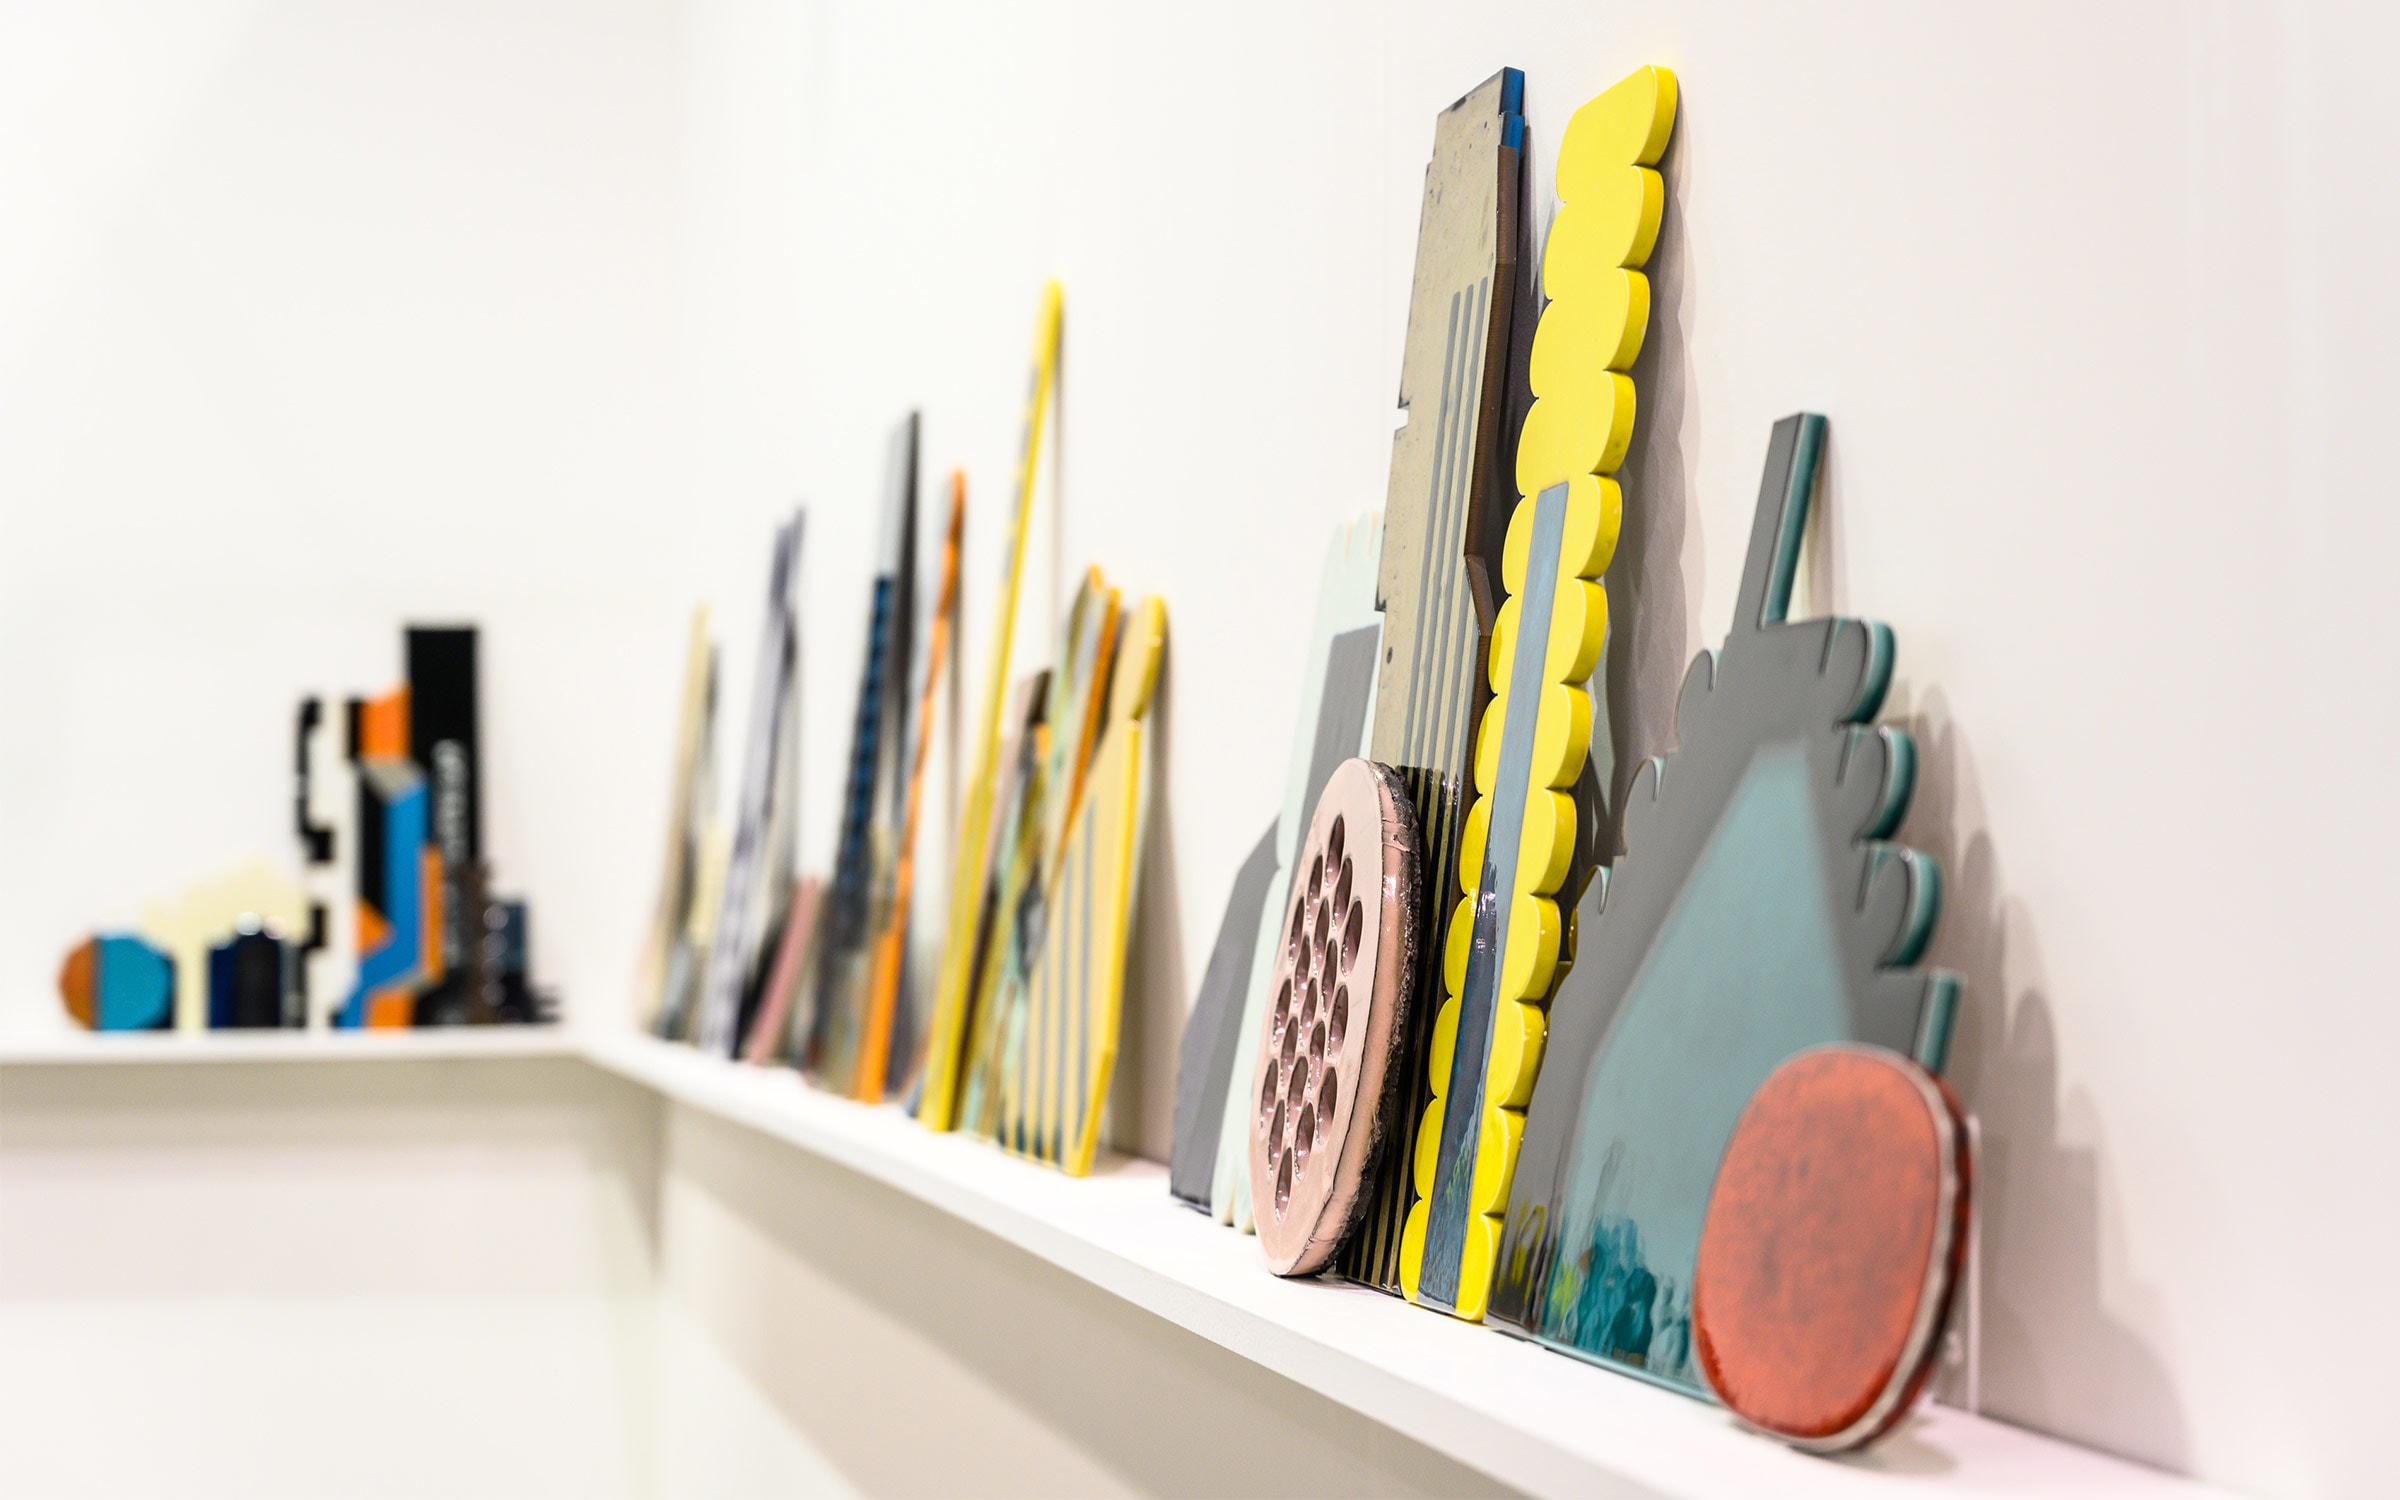 Lubna Chowdhary's ceramic sculptures, on view at Jhaveri Contemporary.